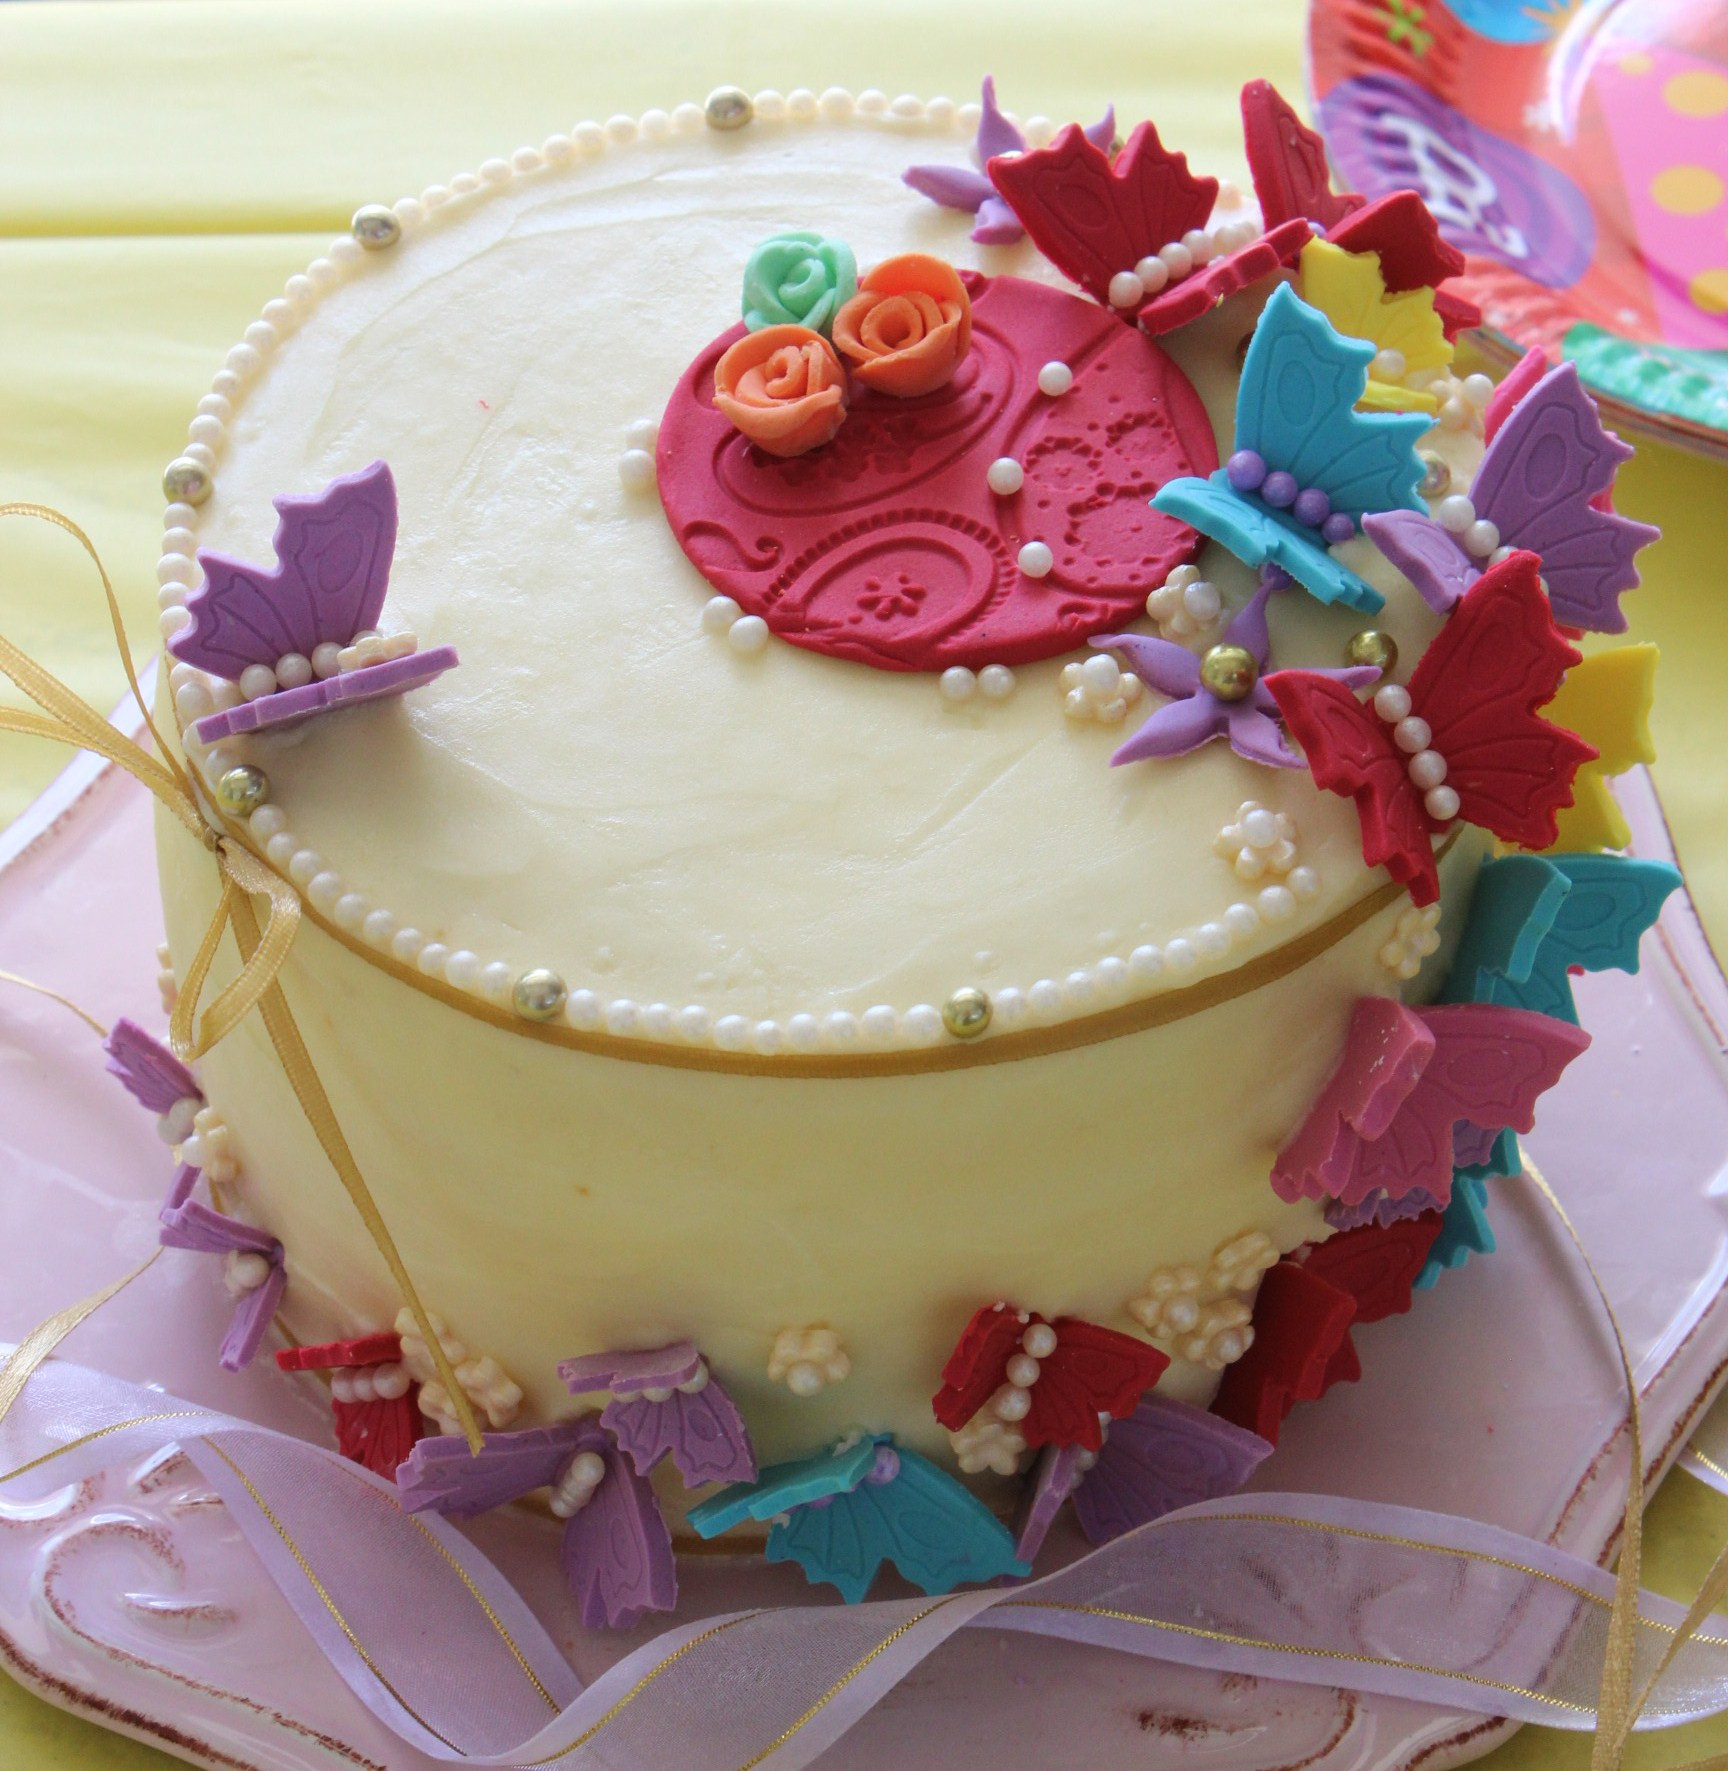 Pretty Birthday Cakes
 25 Best Cake Designs Ever Page 6 of 34